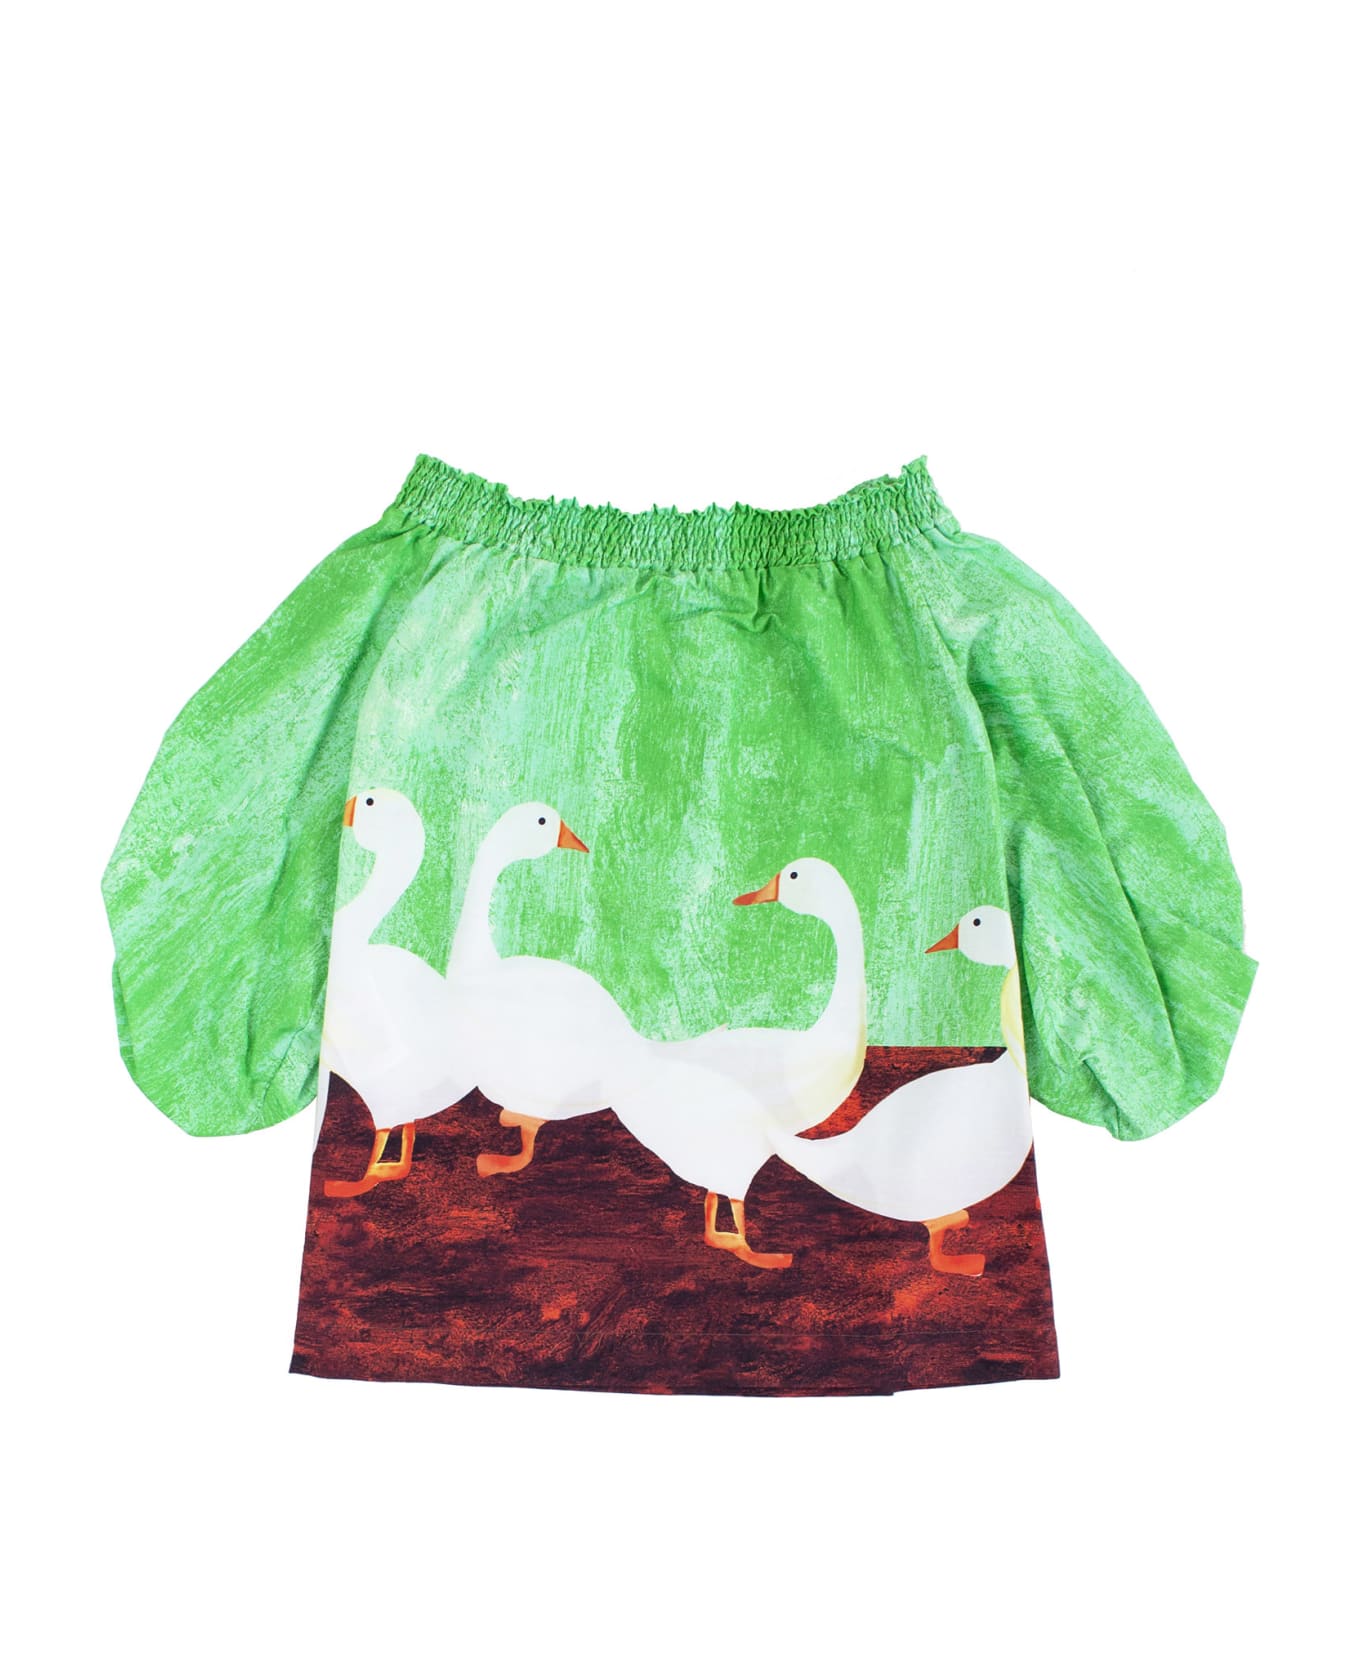 Stella Jean Little Girl Dress With Geese - Green